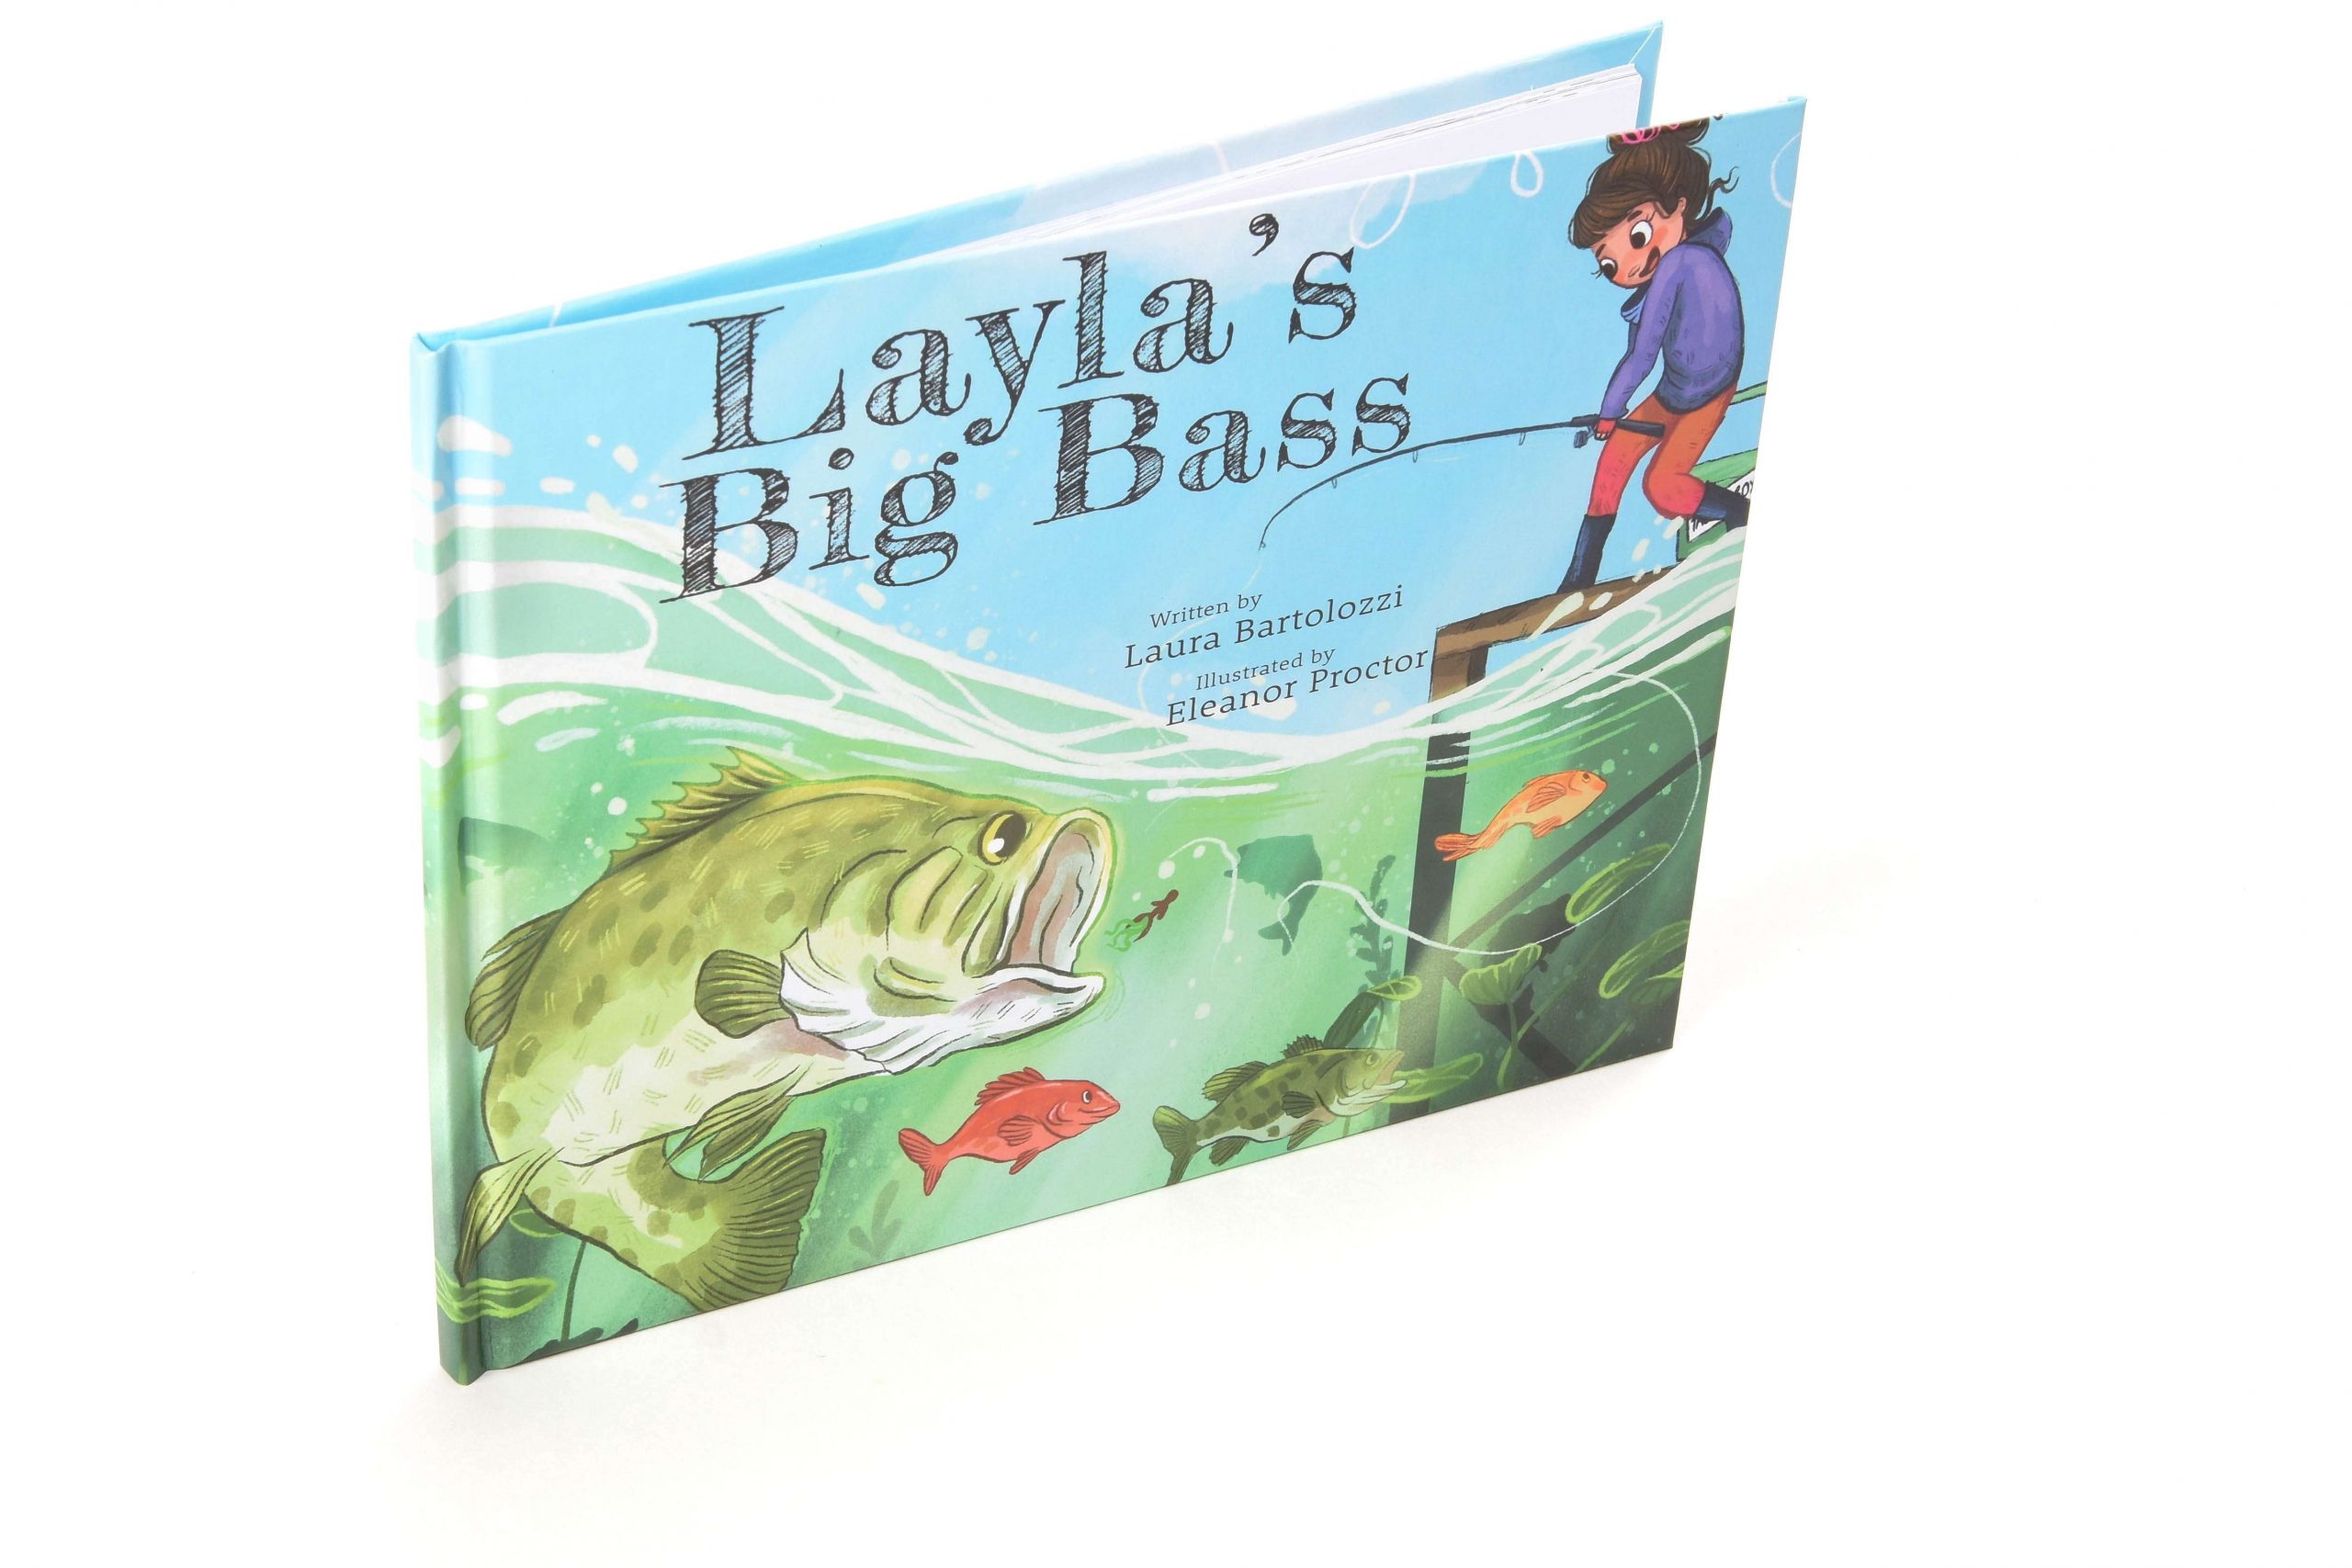 B.A.S.S. sponsors new children's book to inspire girls to fish - Bassmaster